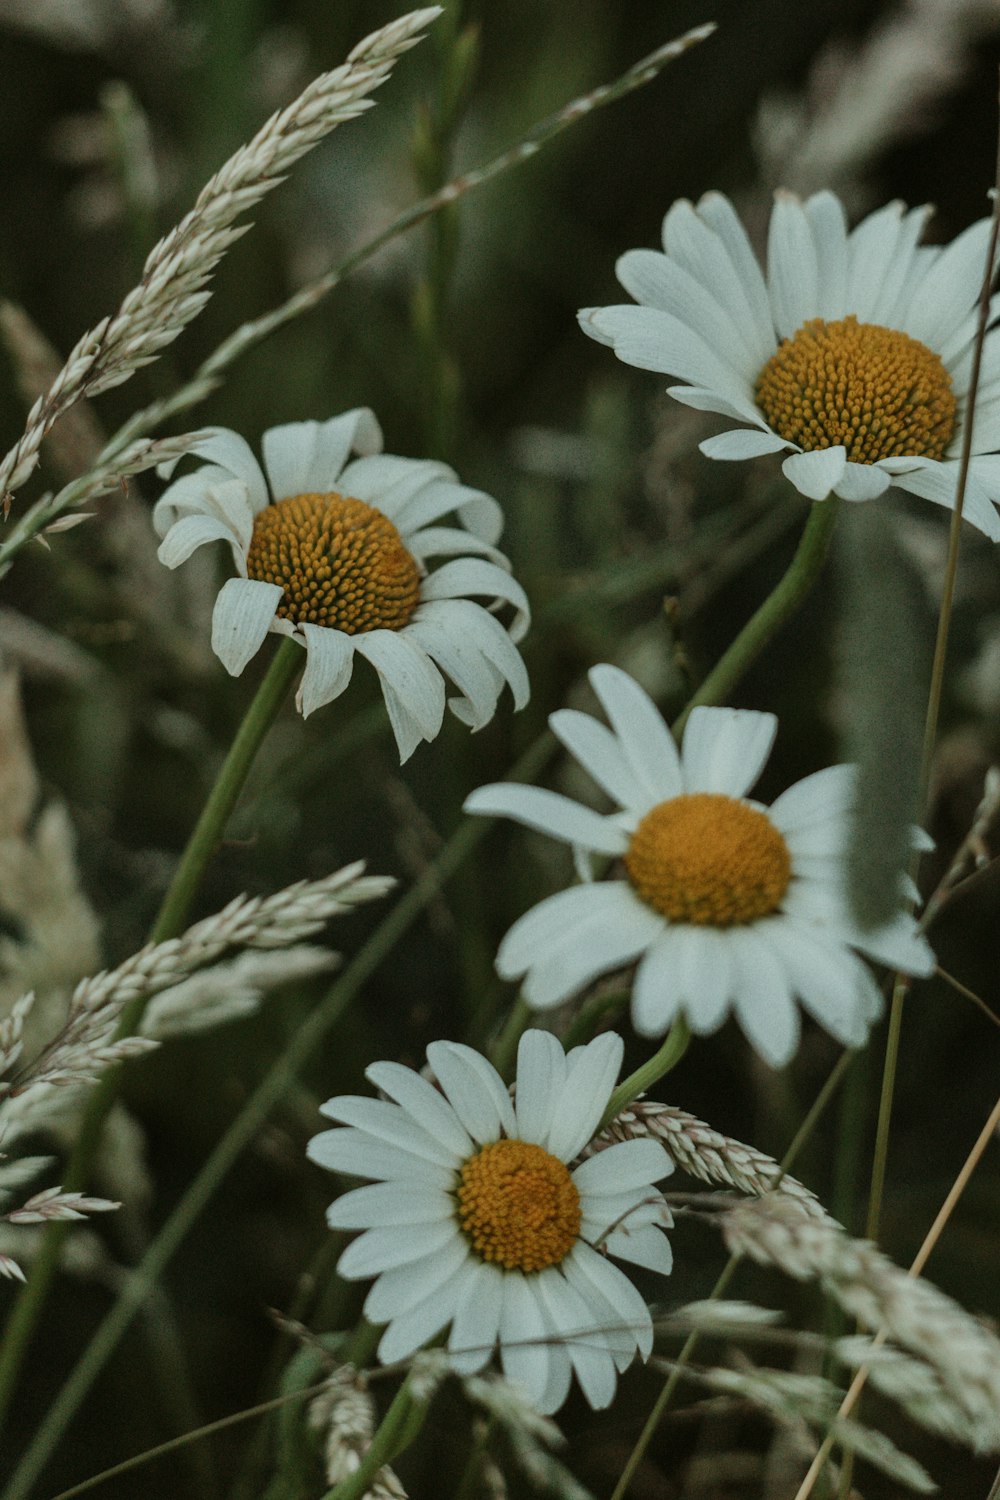 white and yellow daisy flowers in bloom during daytime